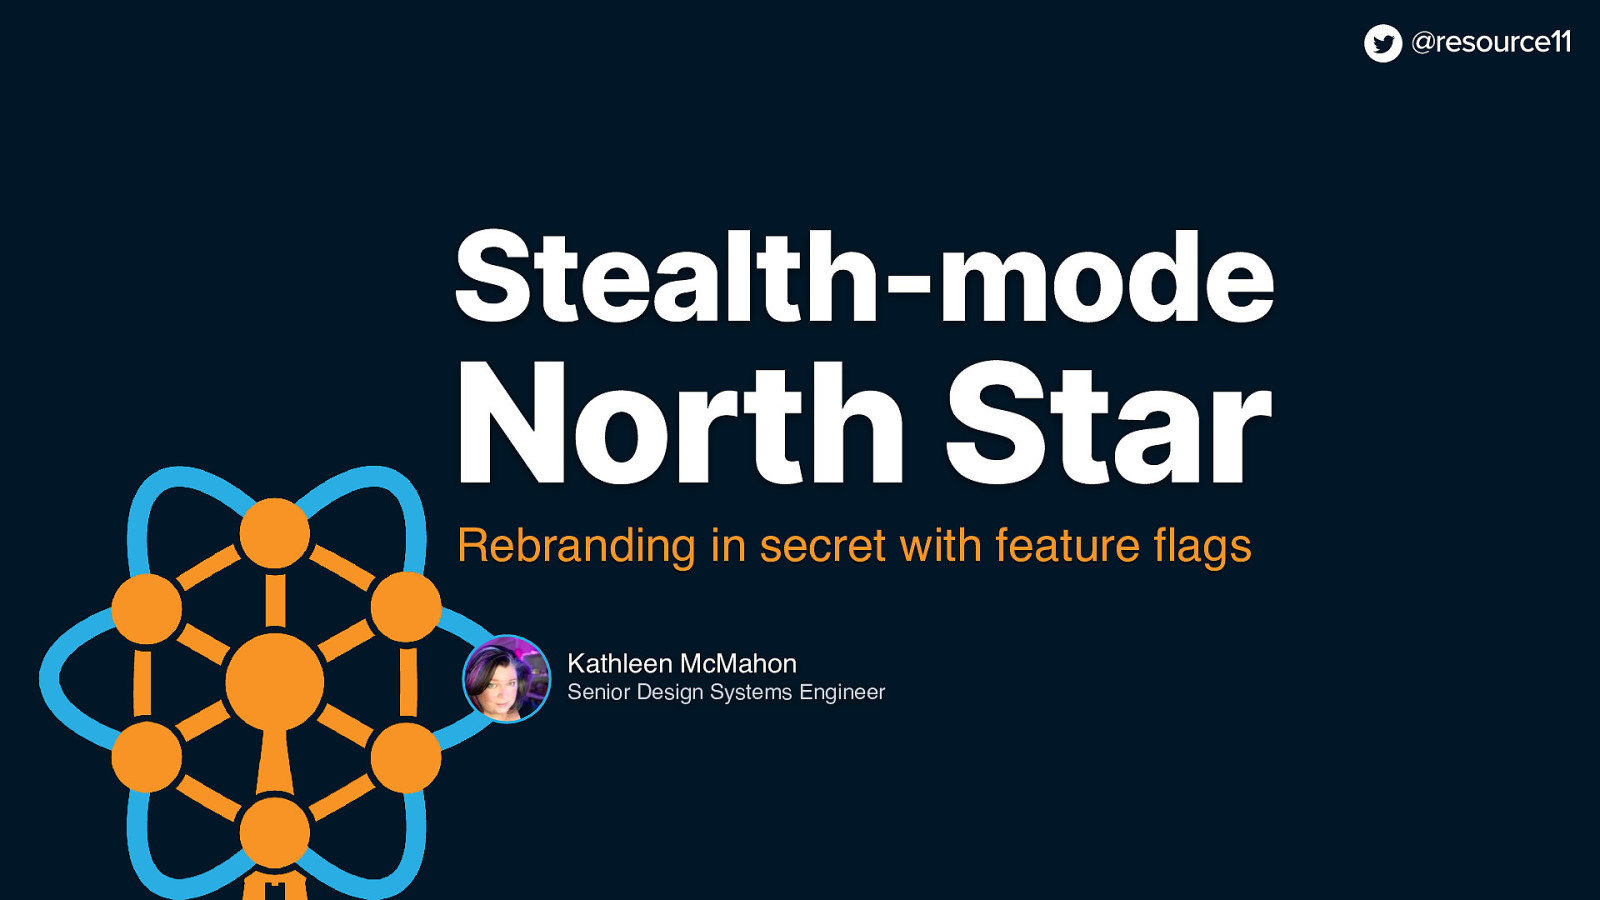 Stealth-mode North Star Rebranding in secret with feature flags — Kathleen McMahon, Senior Design Systems Engineer